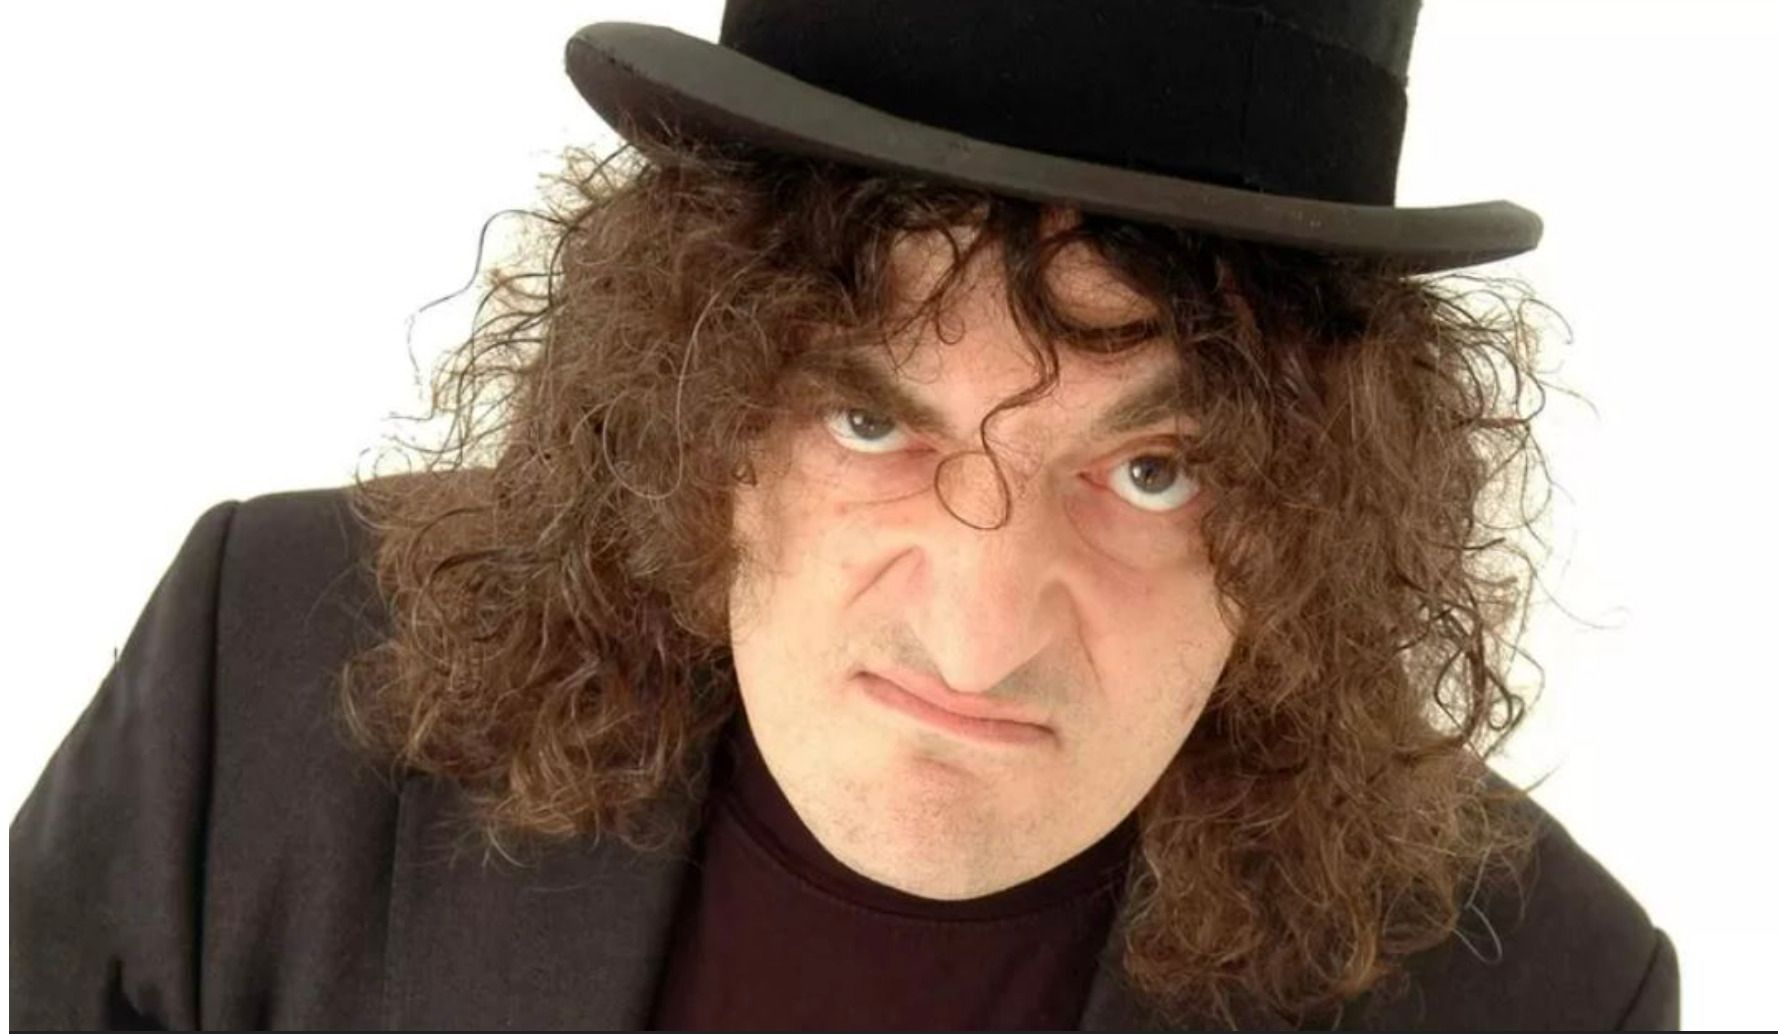 Jerry Sadowitz's show was cancelled at the weekend